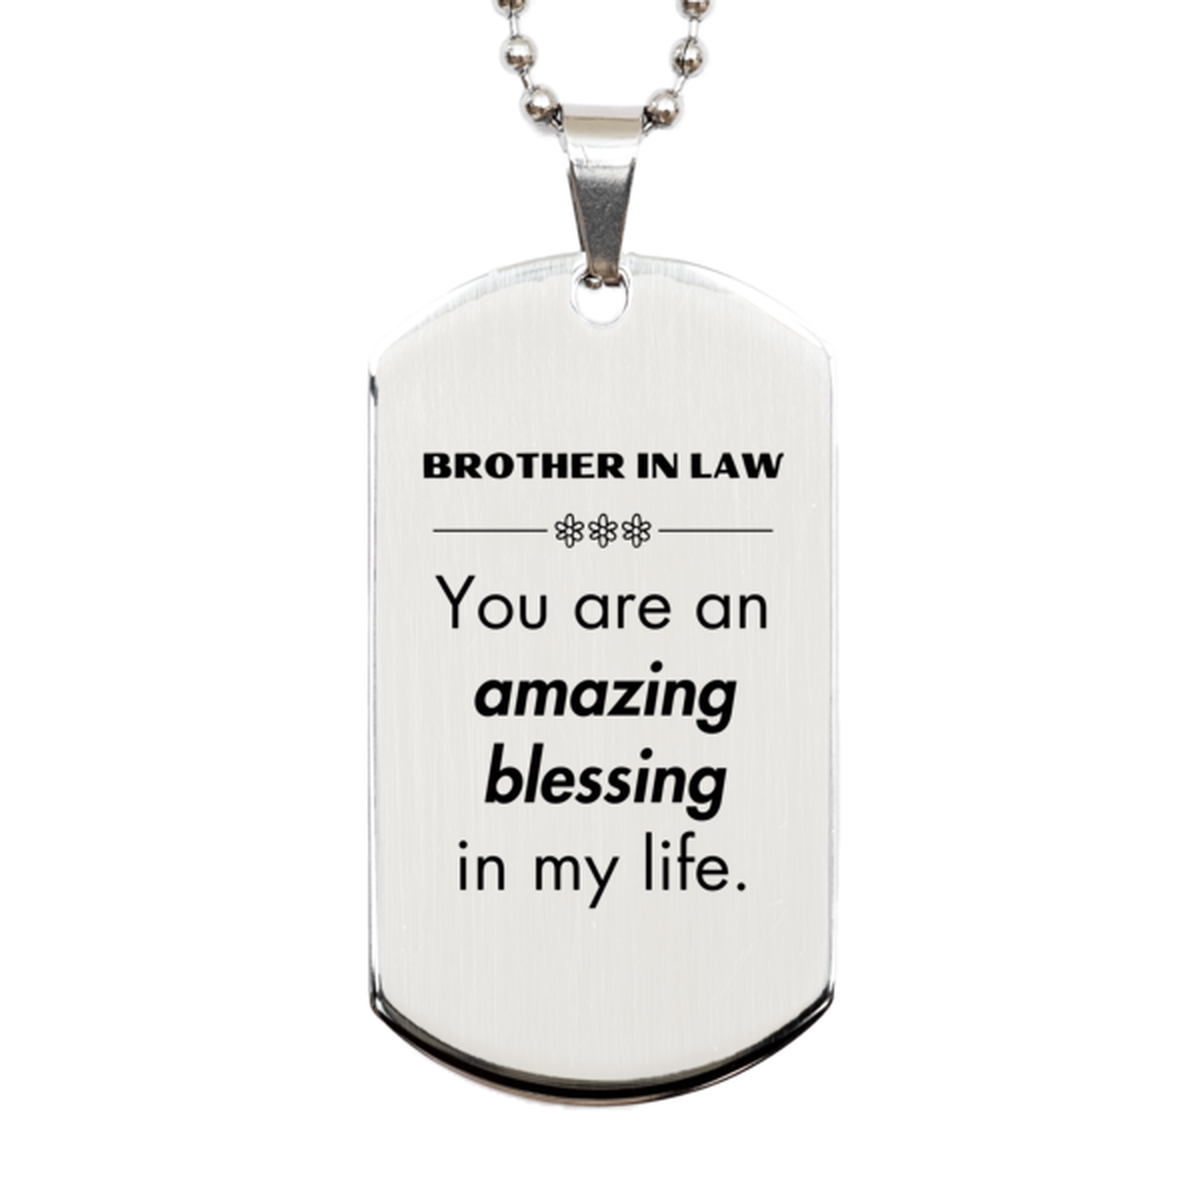 Brother In Law Silver Dog Tag, You are an amazing blessing in my life, Thank You Gifts For Brother In Law, Inspirational Birthday Christmas Unique Gifts For Brother In Law